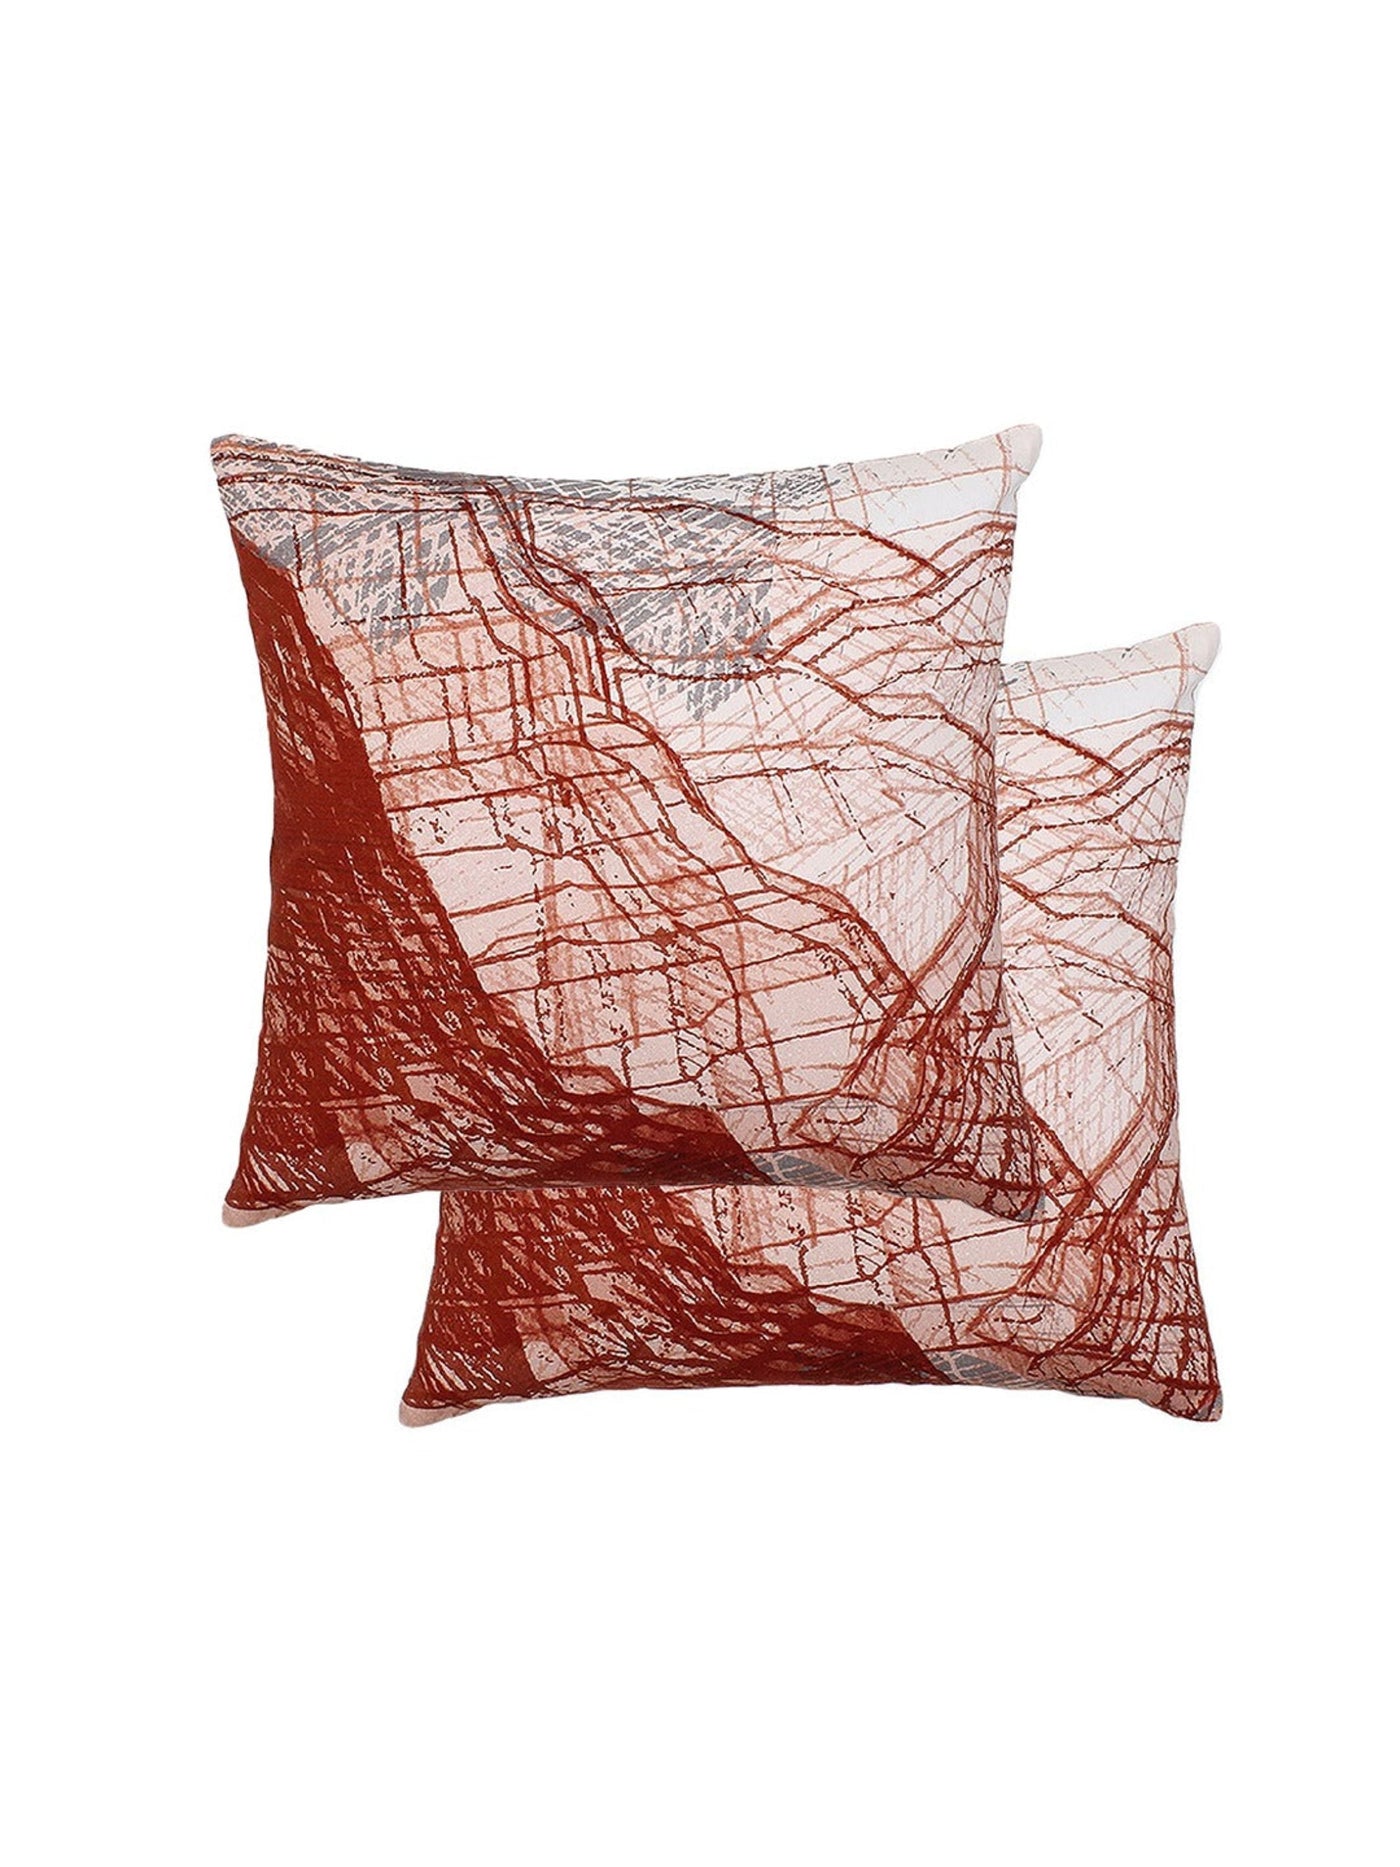 Cushion Cover - Arizona Sketchy Cotton 2 s-Red-8903773001026